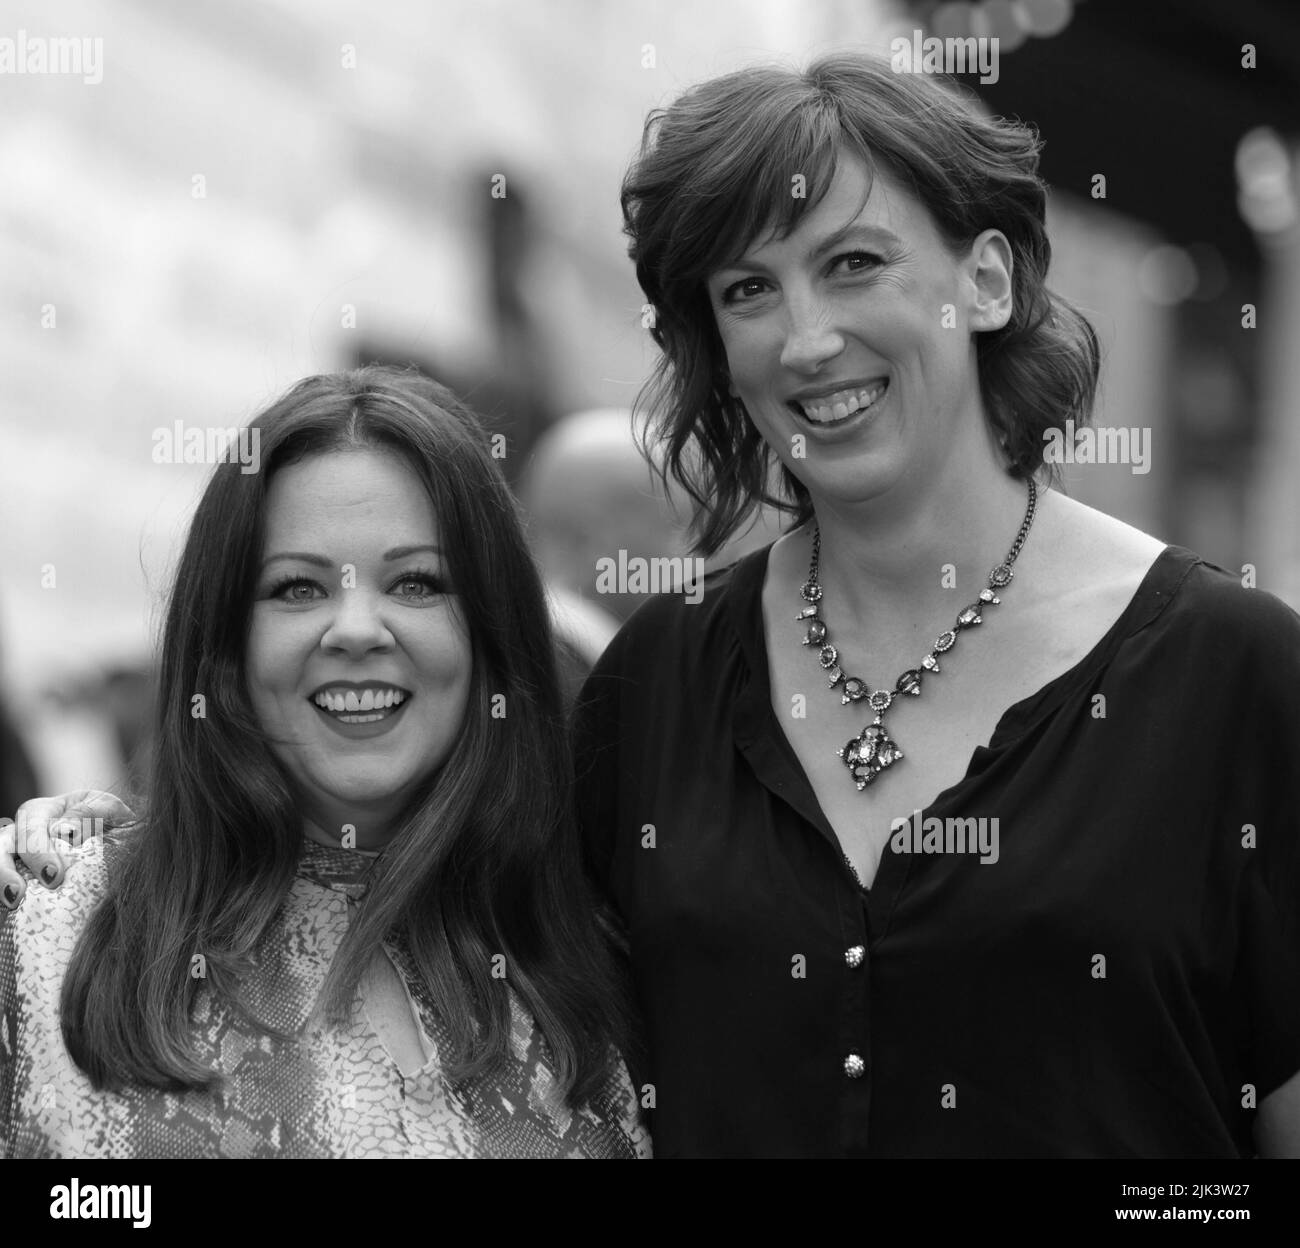 London, UK, 27th May 2015: Melissa Mccarthy and Miranda Hart attend The European premiere of âSPY' at the Odeon Cinema, Leicester Square in London, , ÿ, , p¼AE, f, f, e, c, t, s,  , H, i, s, t, o, r, y,  , a, n, d,  , L, a, y, e, r, s, , , , , , , c, , c«Í, @¼CØßB, , , , , , , , , , , , , , , , , , , , , , , , , , , , , , , , , , , , , , , , , , , , , , , , , , , , , , , , , , , , , , , , , , , , , , , , , , , , , , , , , , , , , , , , , , , , , , , , , , , , , , , , , , , , , , , , , , , , , , , , , , , , , , , , , , , , , , , , , , , , , , , , , , , , , , , , , , , , , , , , , , , , , Stock Photo